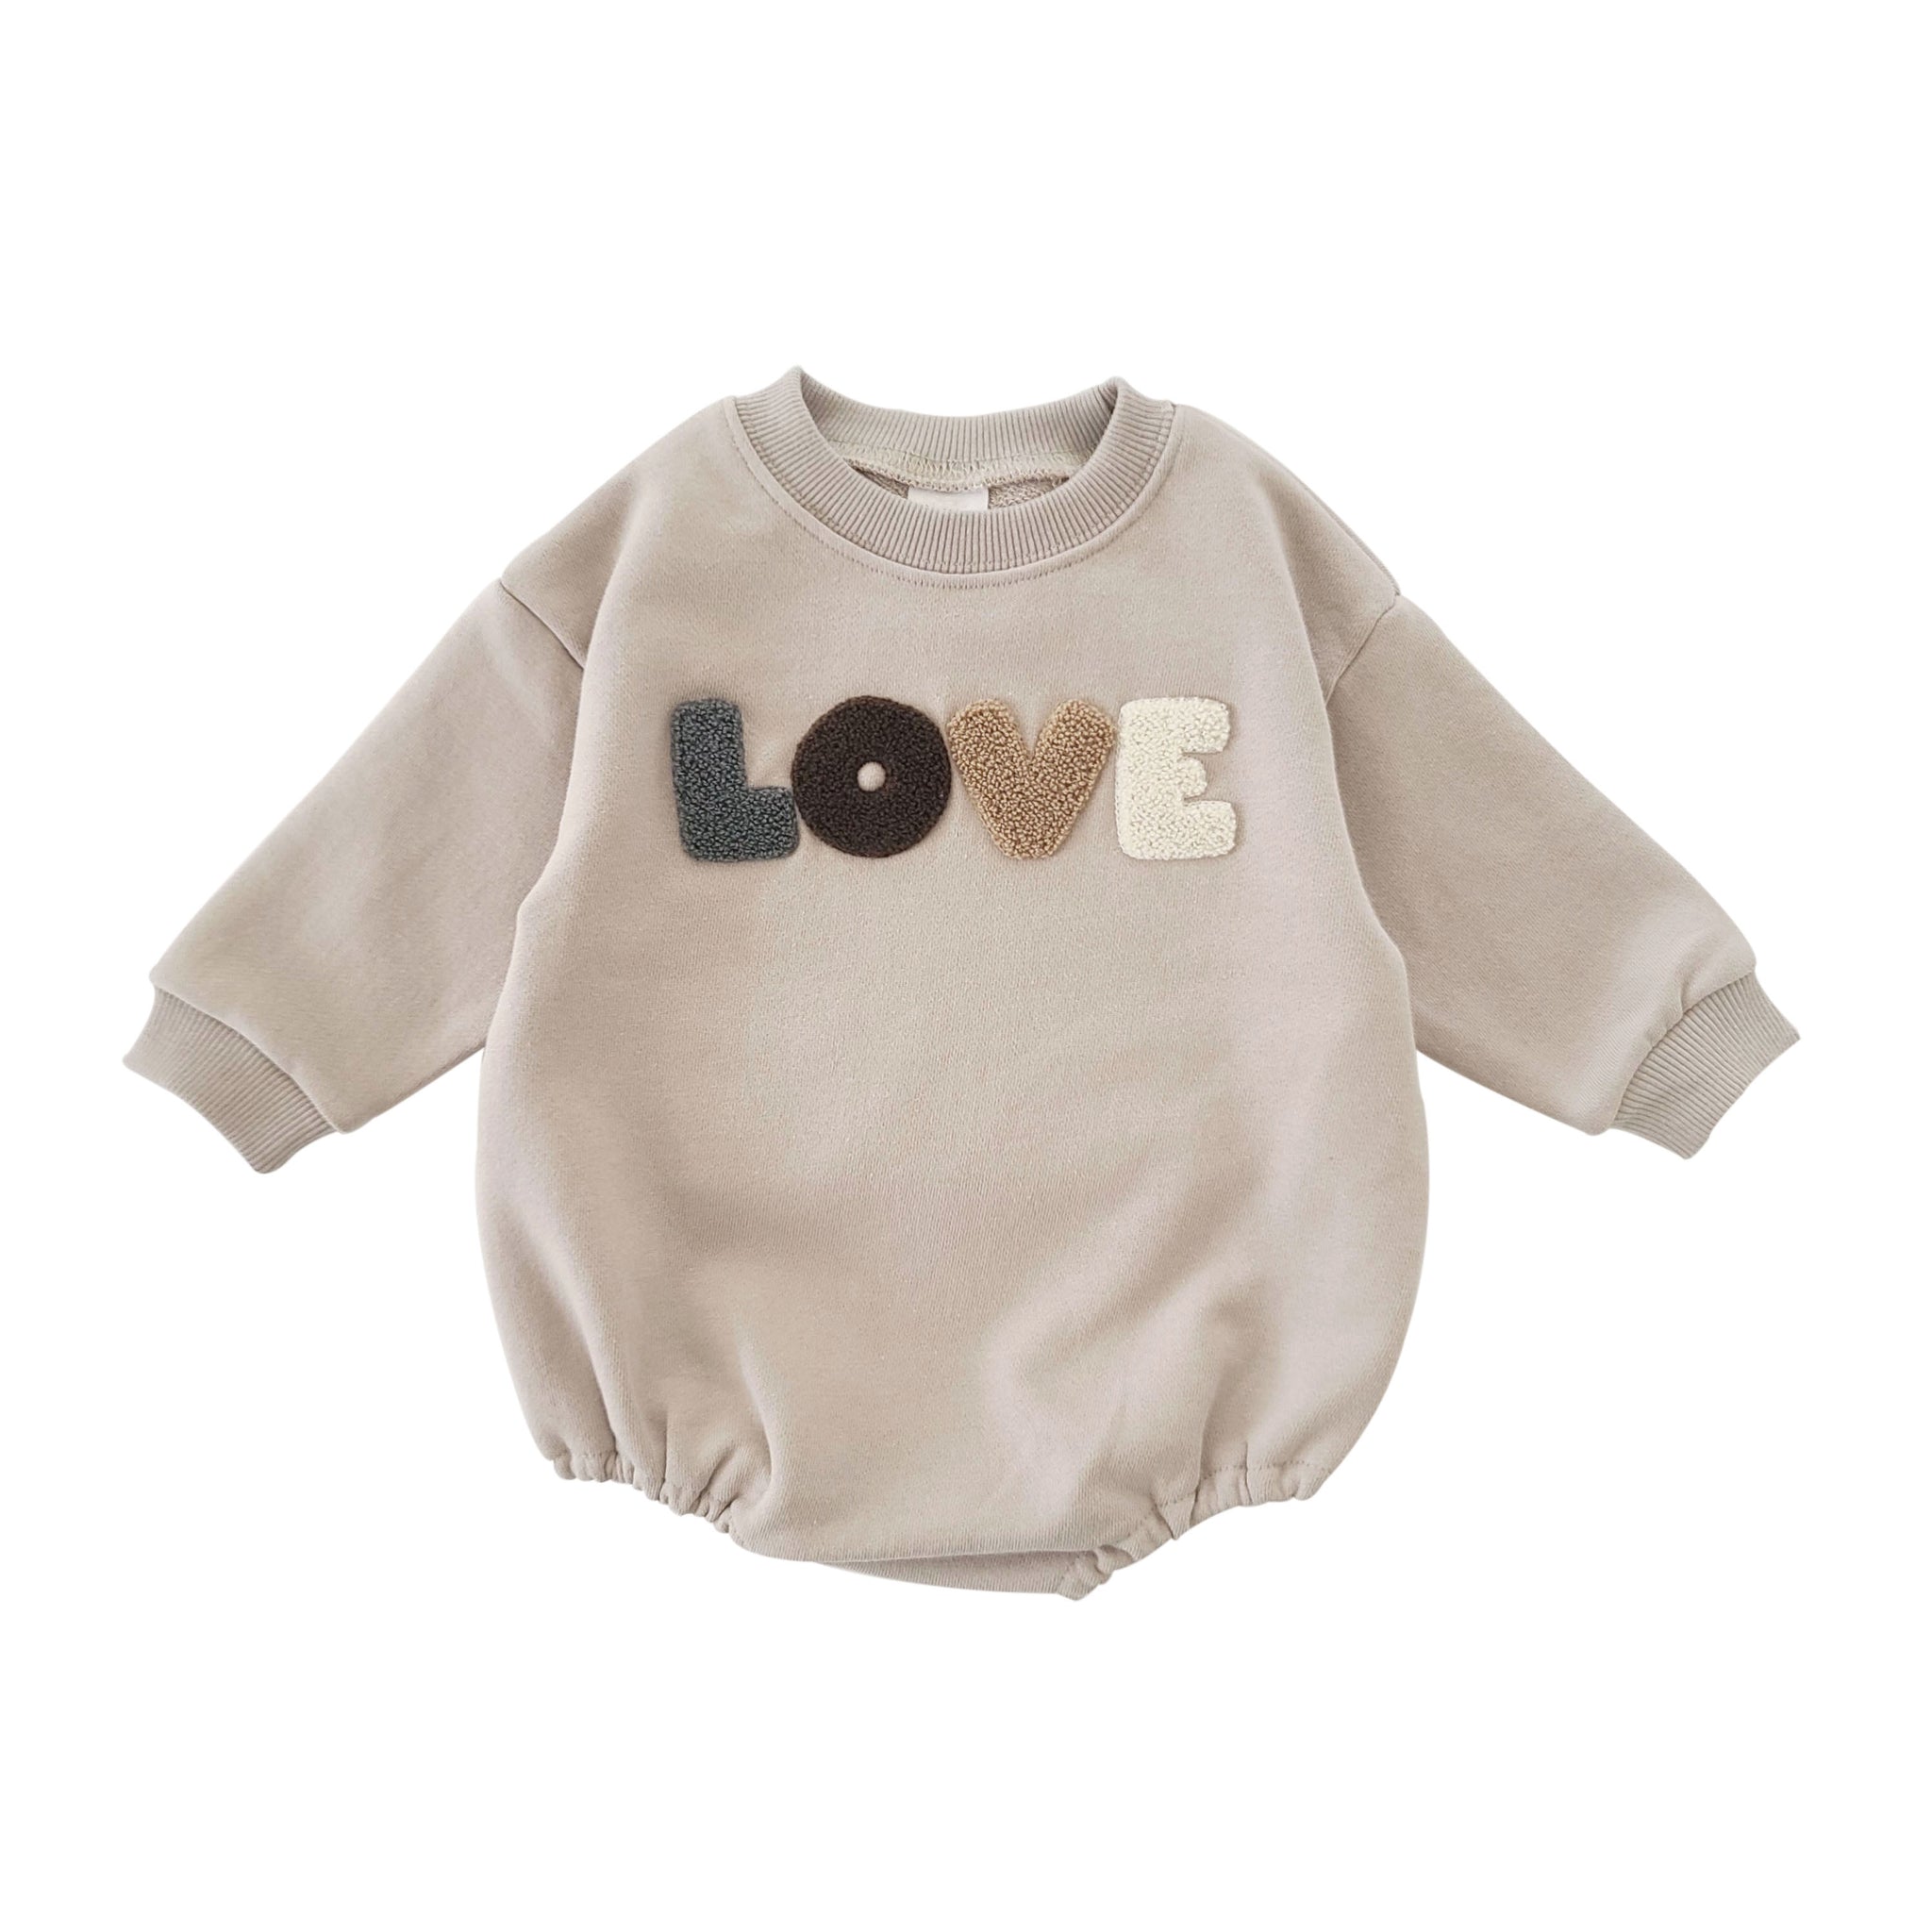 Baby LOVE Embroidery Sweatshirt Romper (0-18m) - Gray - AT NOON STORE